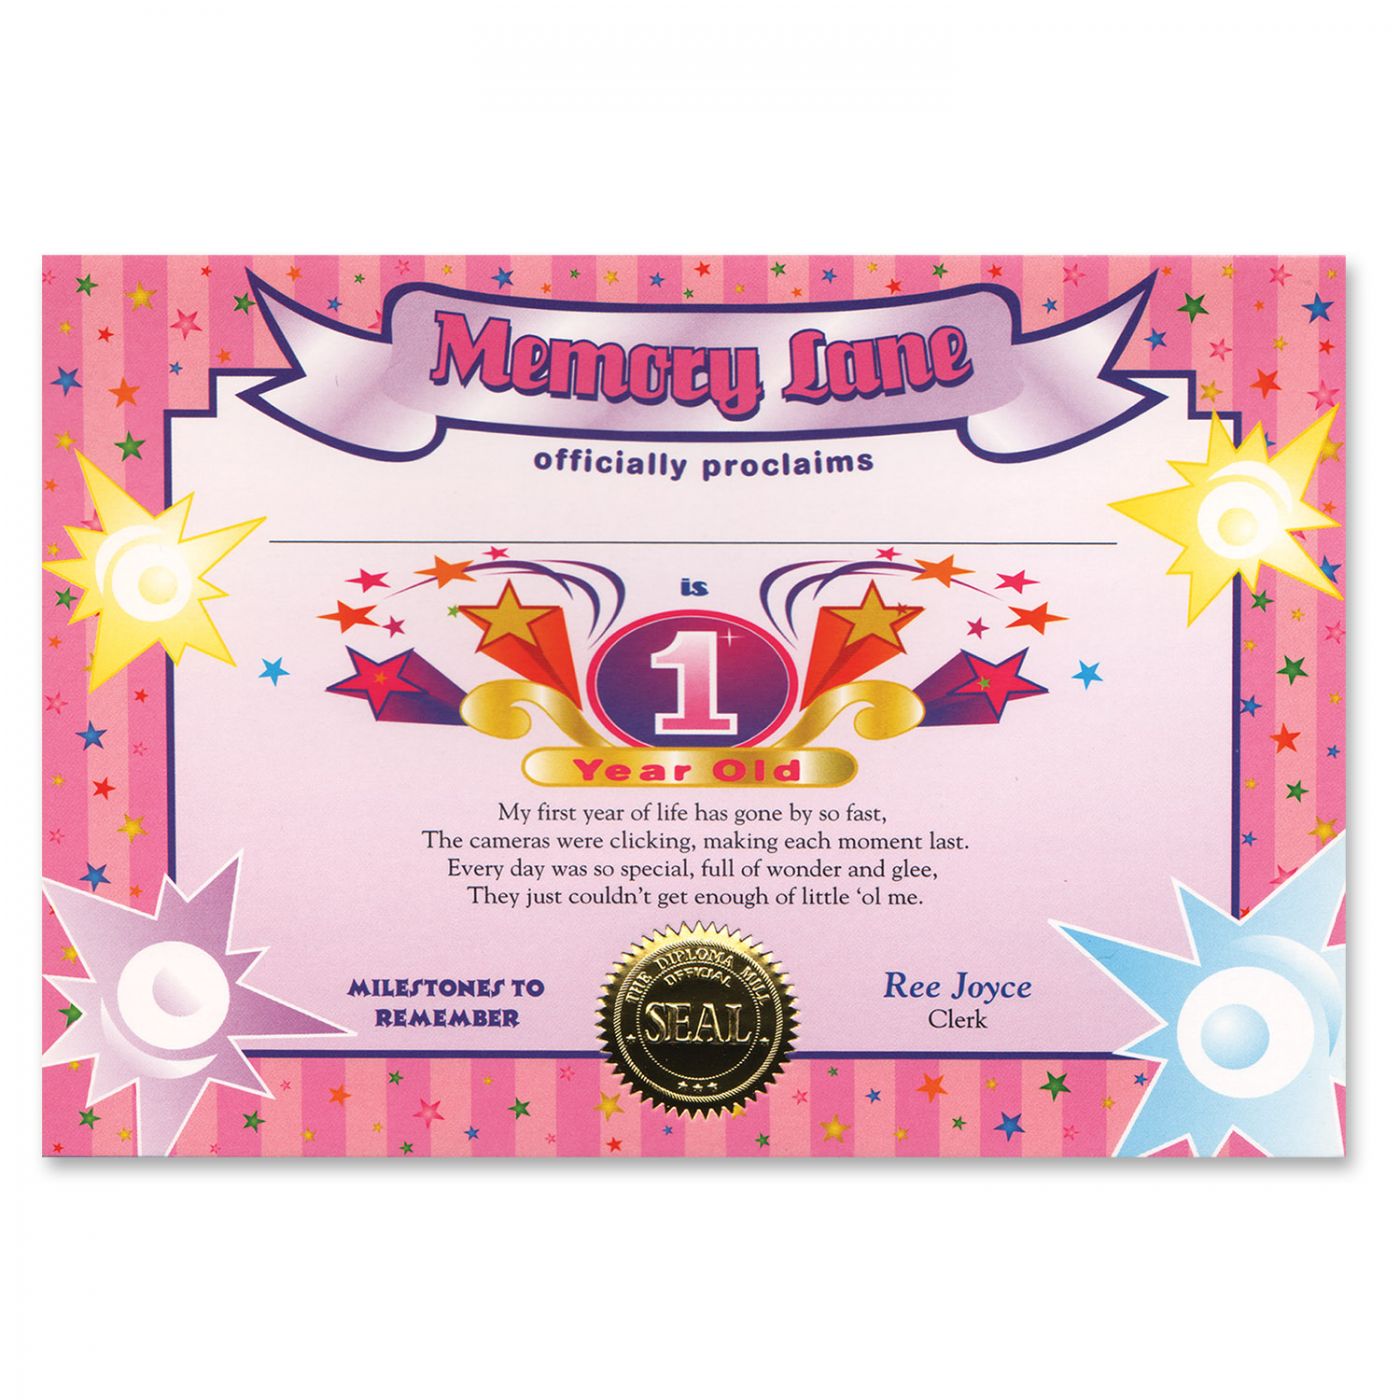 Image of 1 Year Old (Girl) Certificate (6)